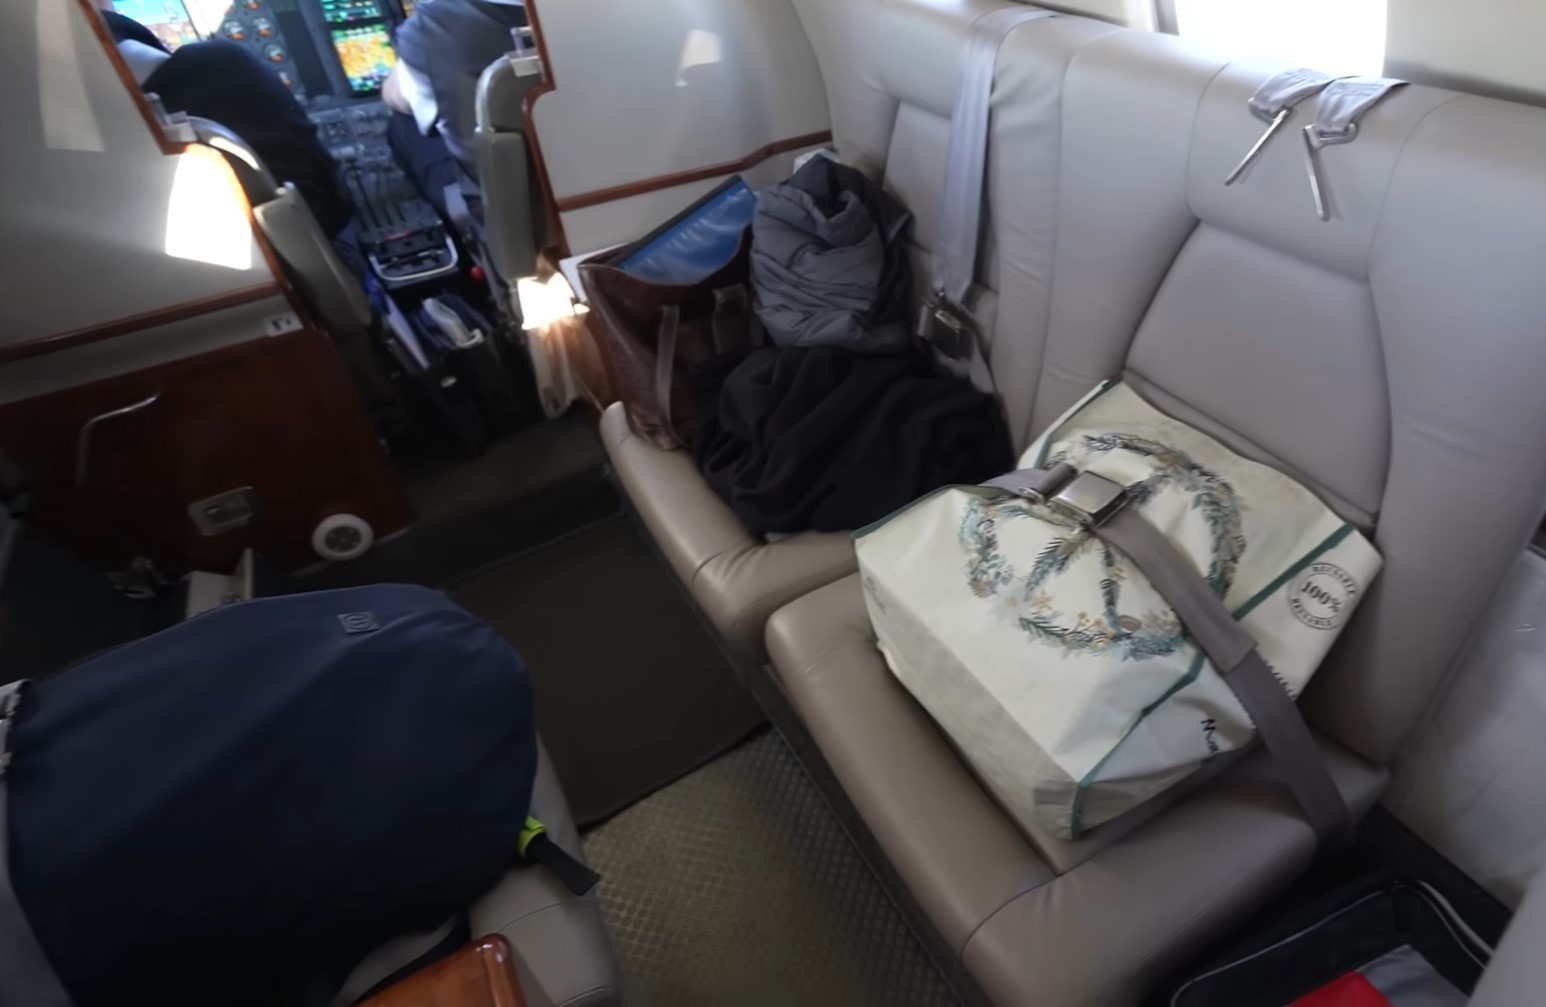 YouTuber stuns people by using 'Uber' private jet service worth over $500 8